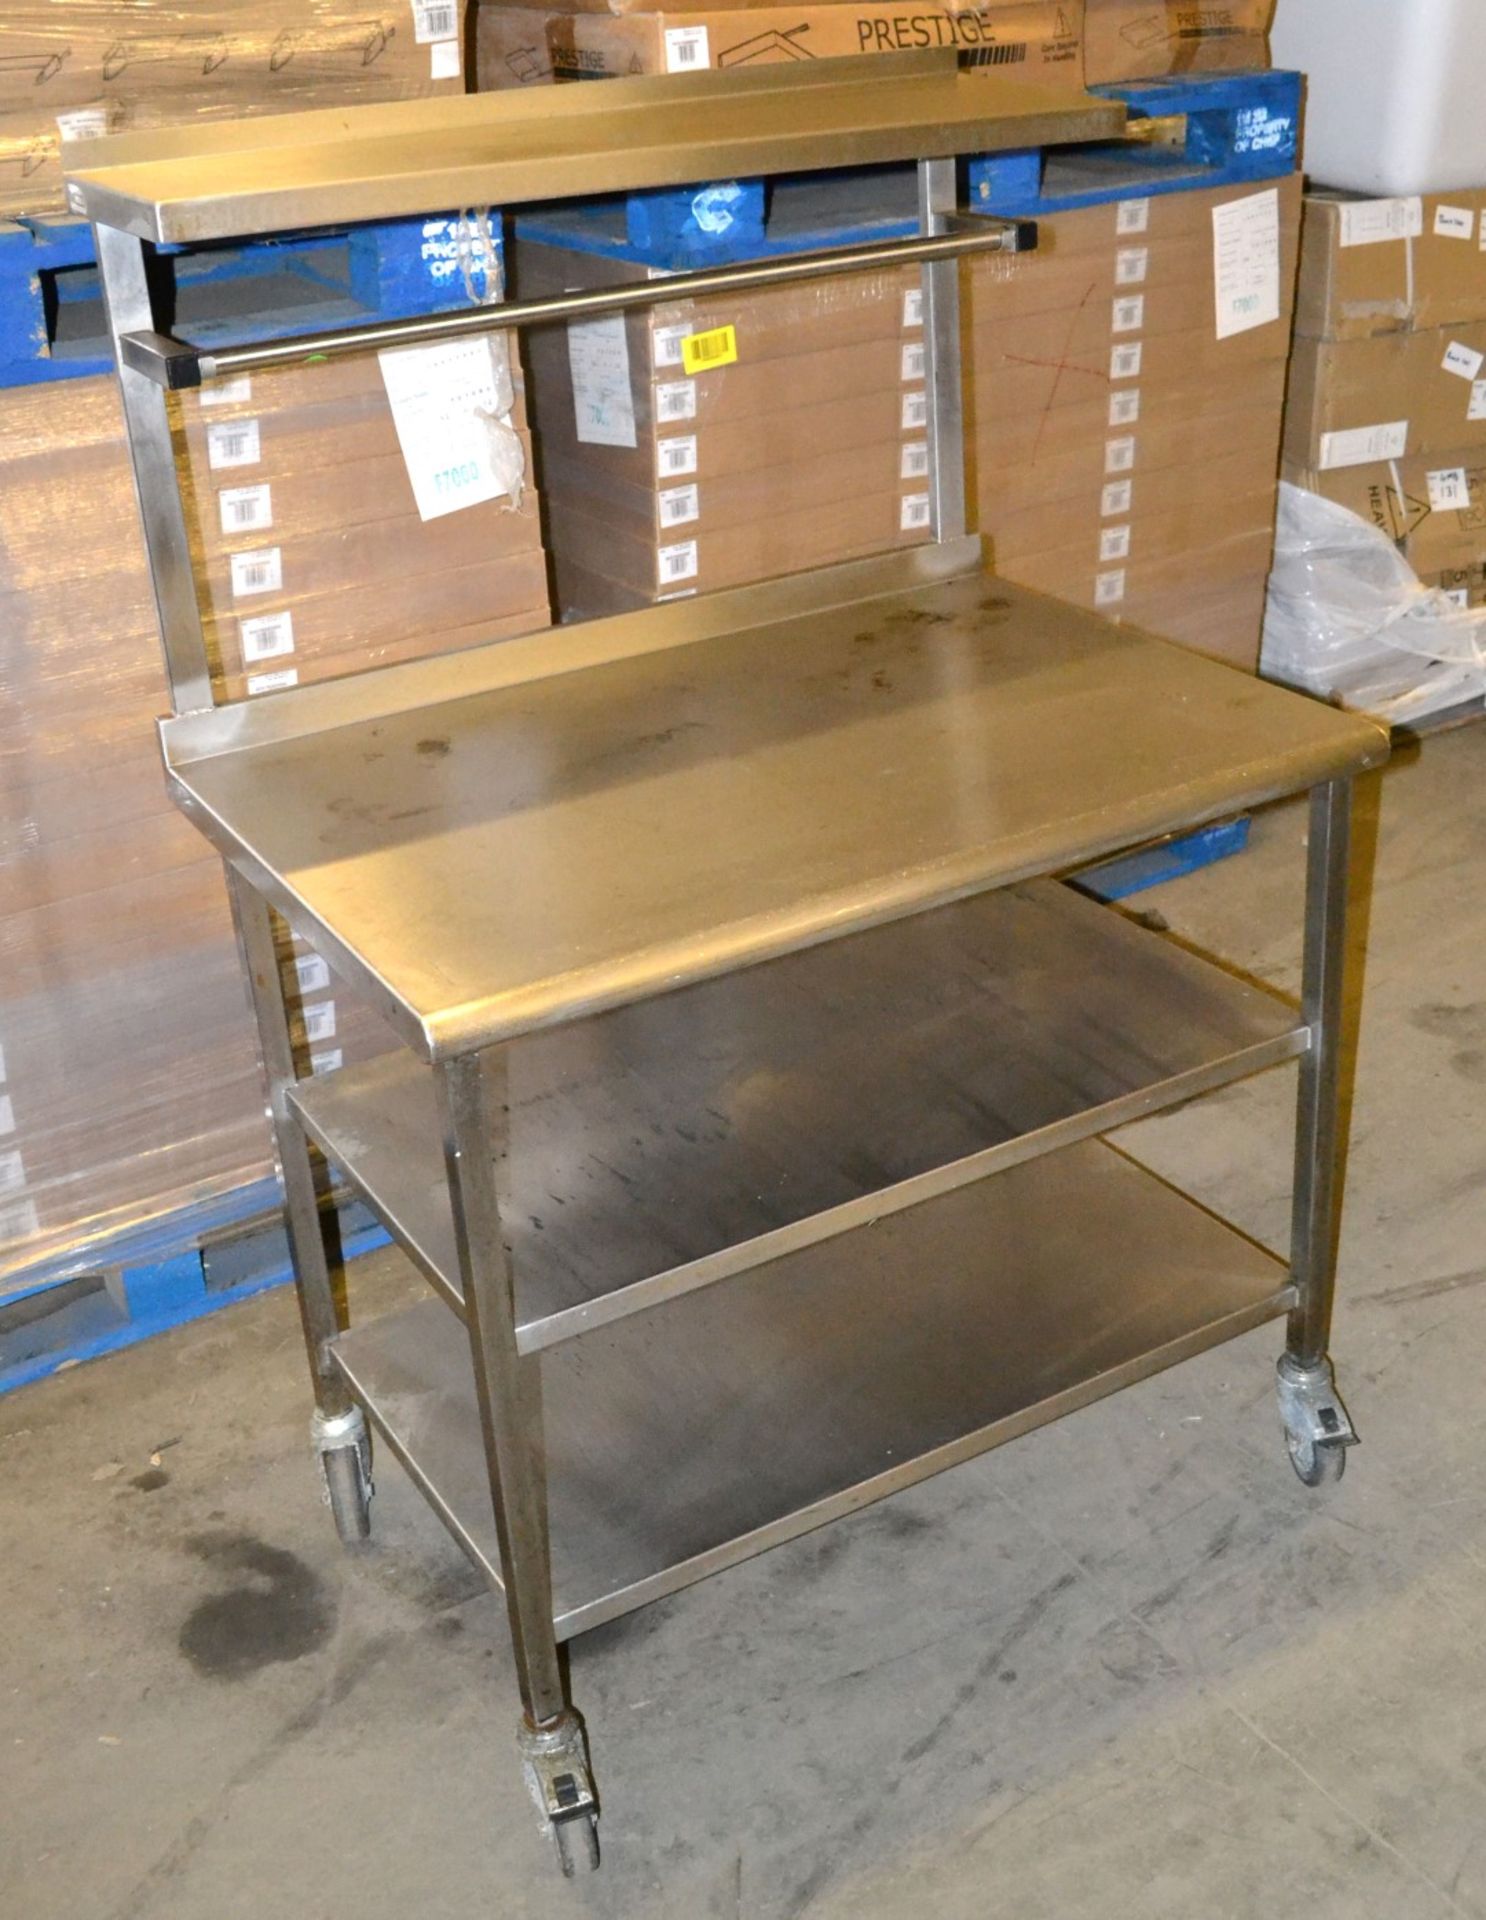 1 x Wheeled Stainless Steel Prep Table - Dimensions: 100 x 69.5 x 148cm - Ref: MC120 - CL282 - Locat - Image 3 of 11